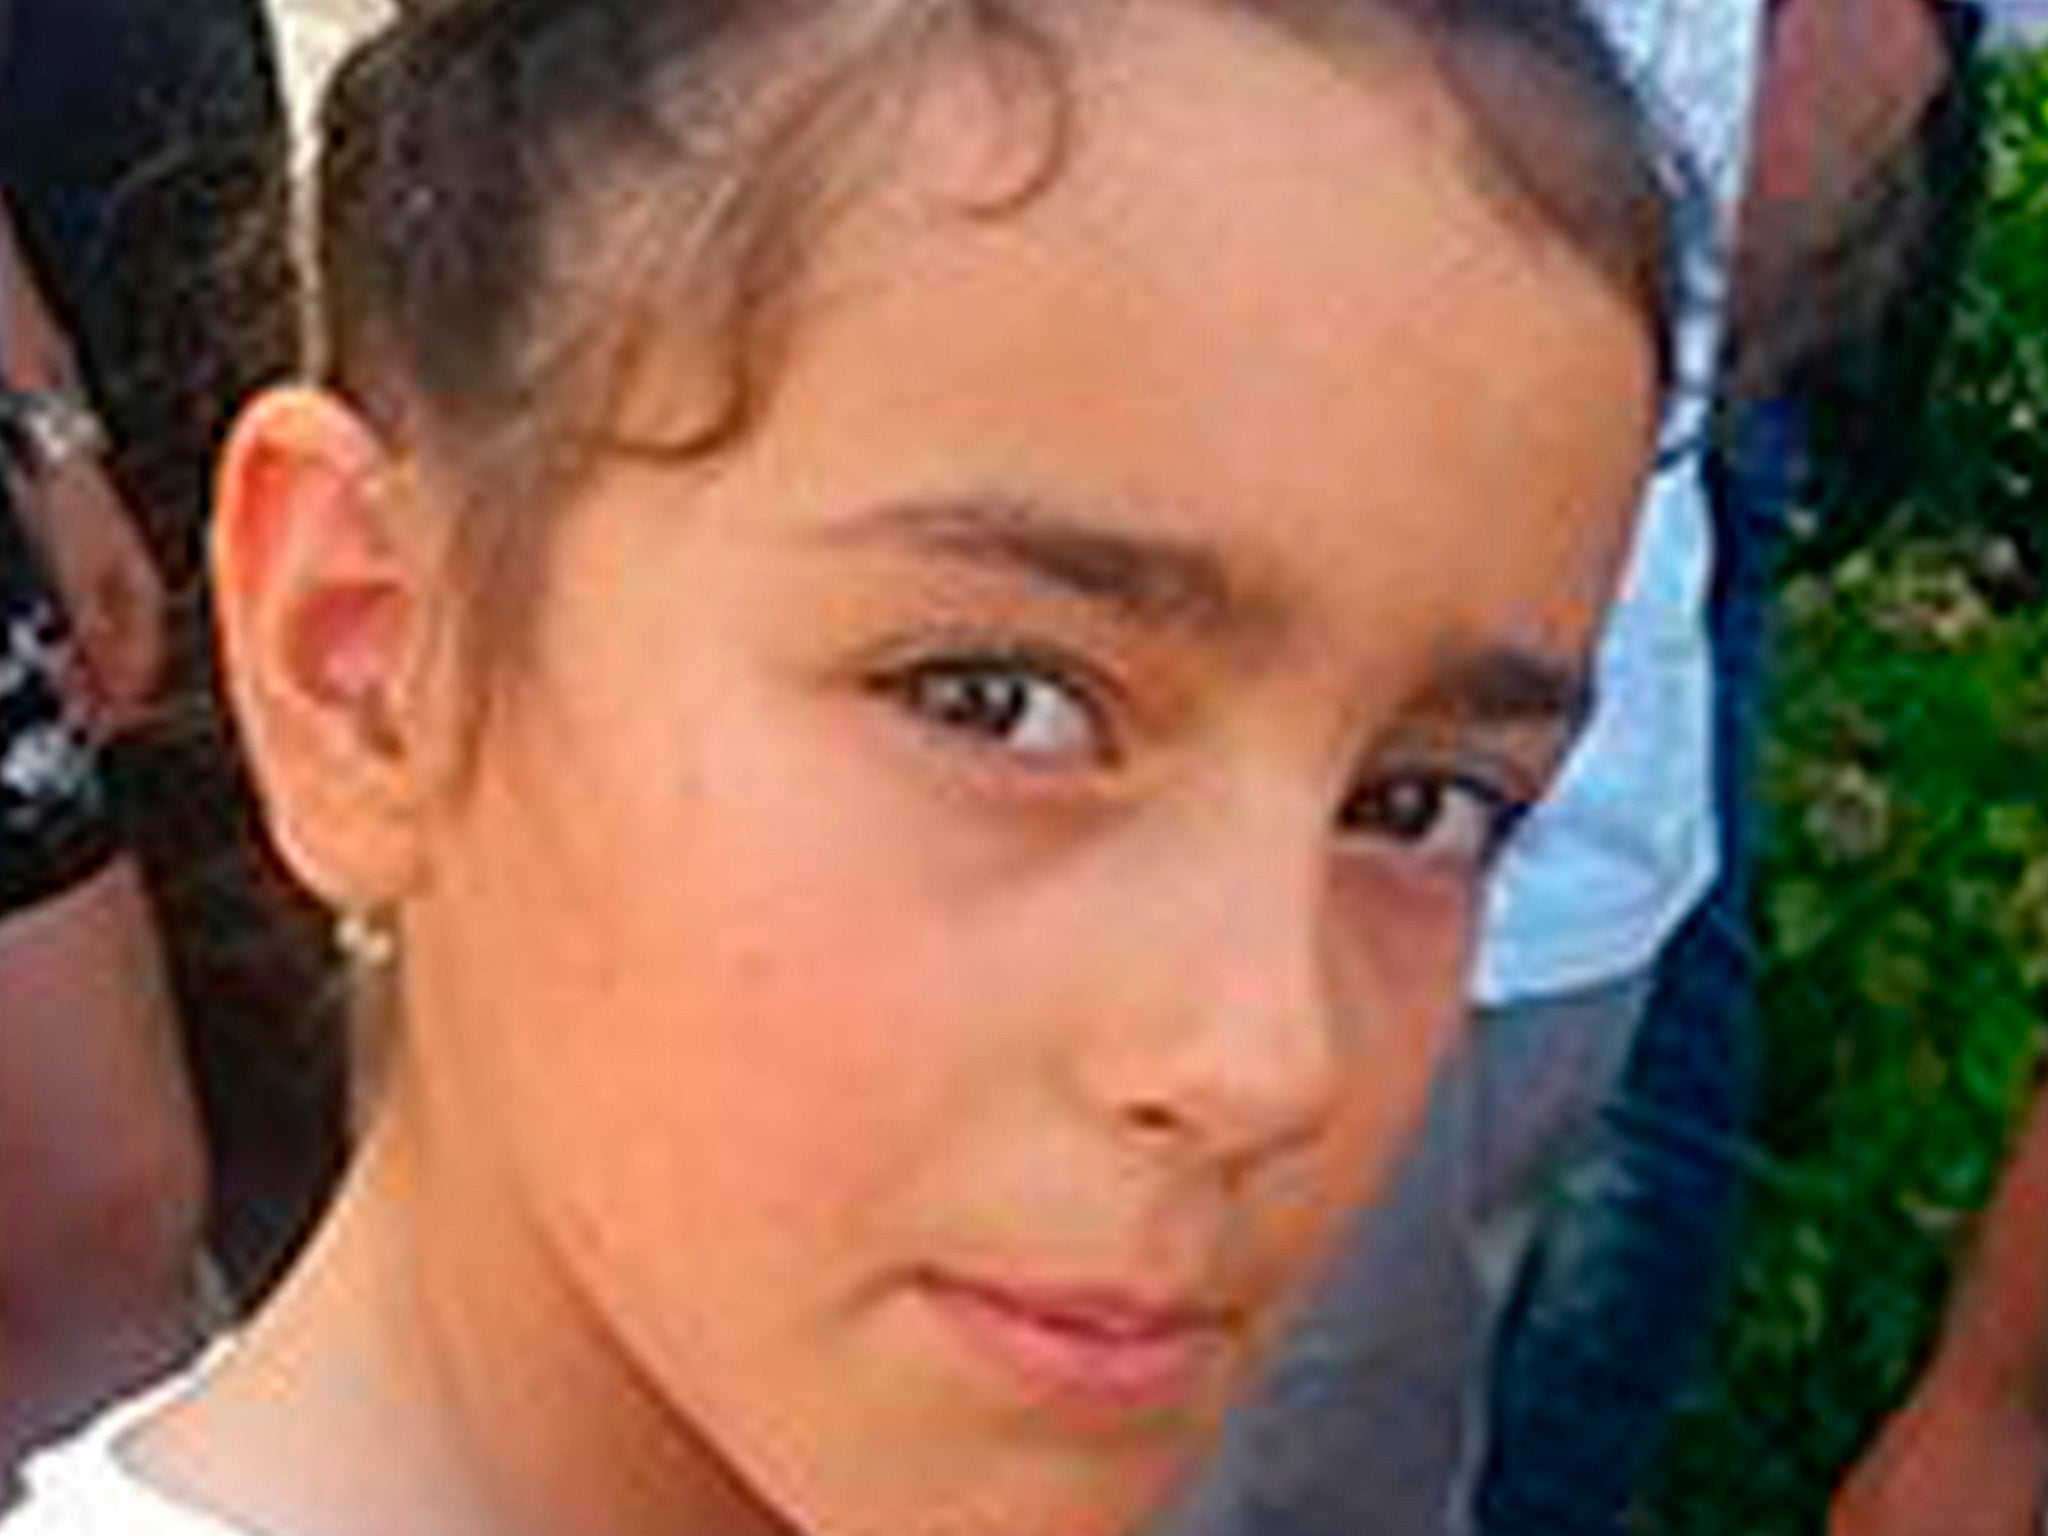 Maelys de Araujo was 8 when abducted and killed